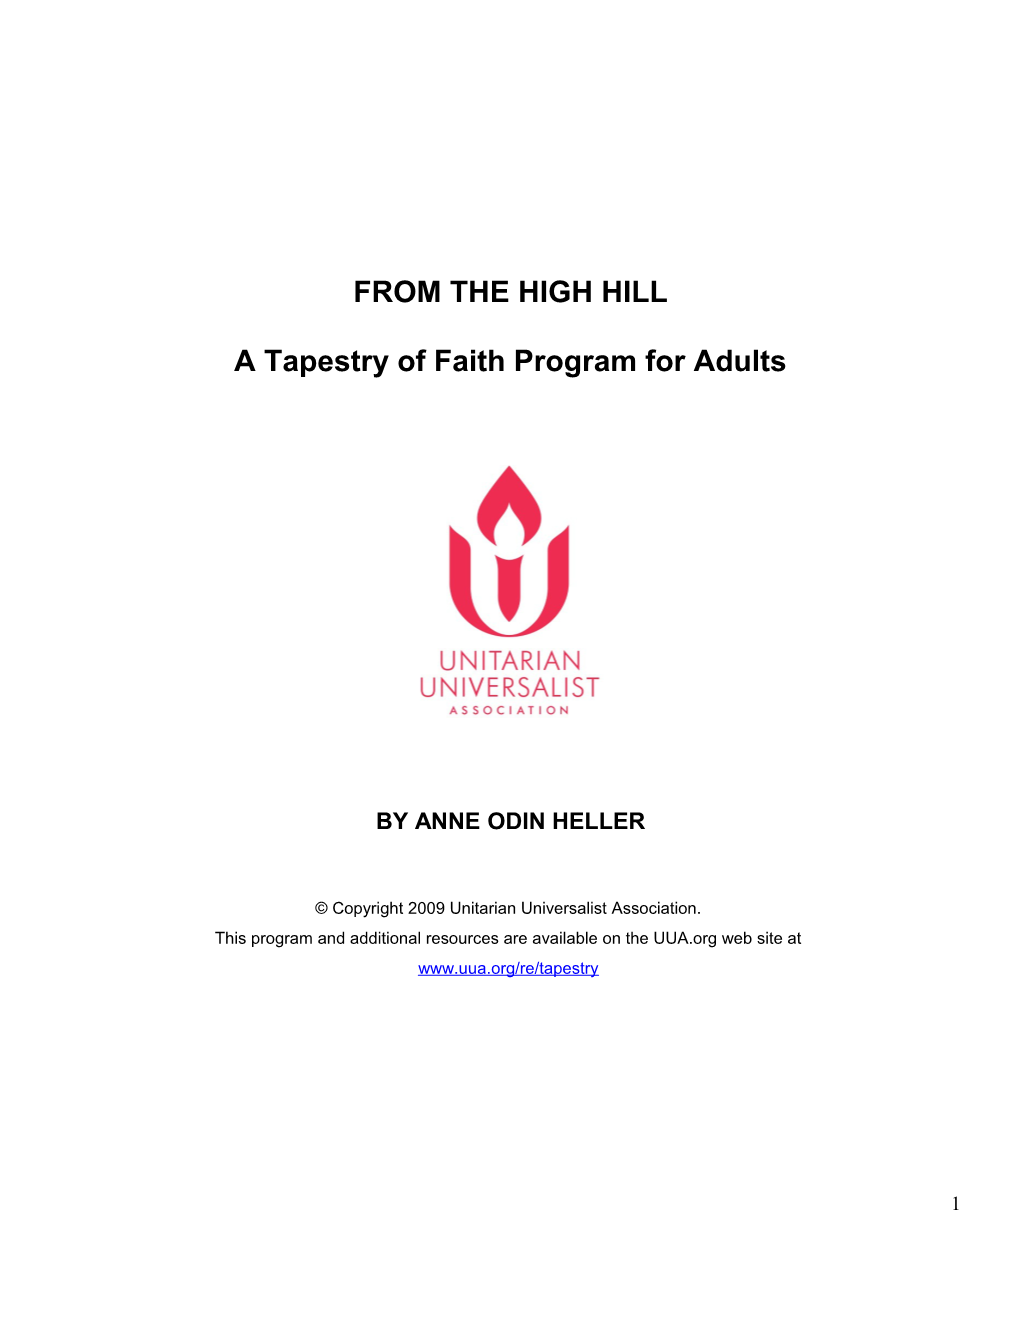 FROM the HIGH HILL a Tapestry of Faith Program for Adults